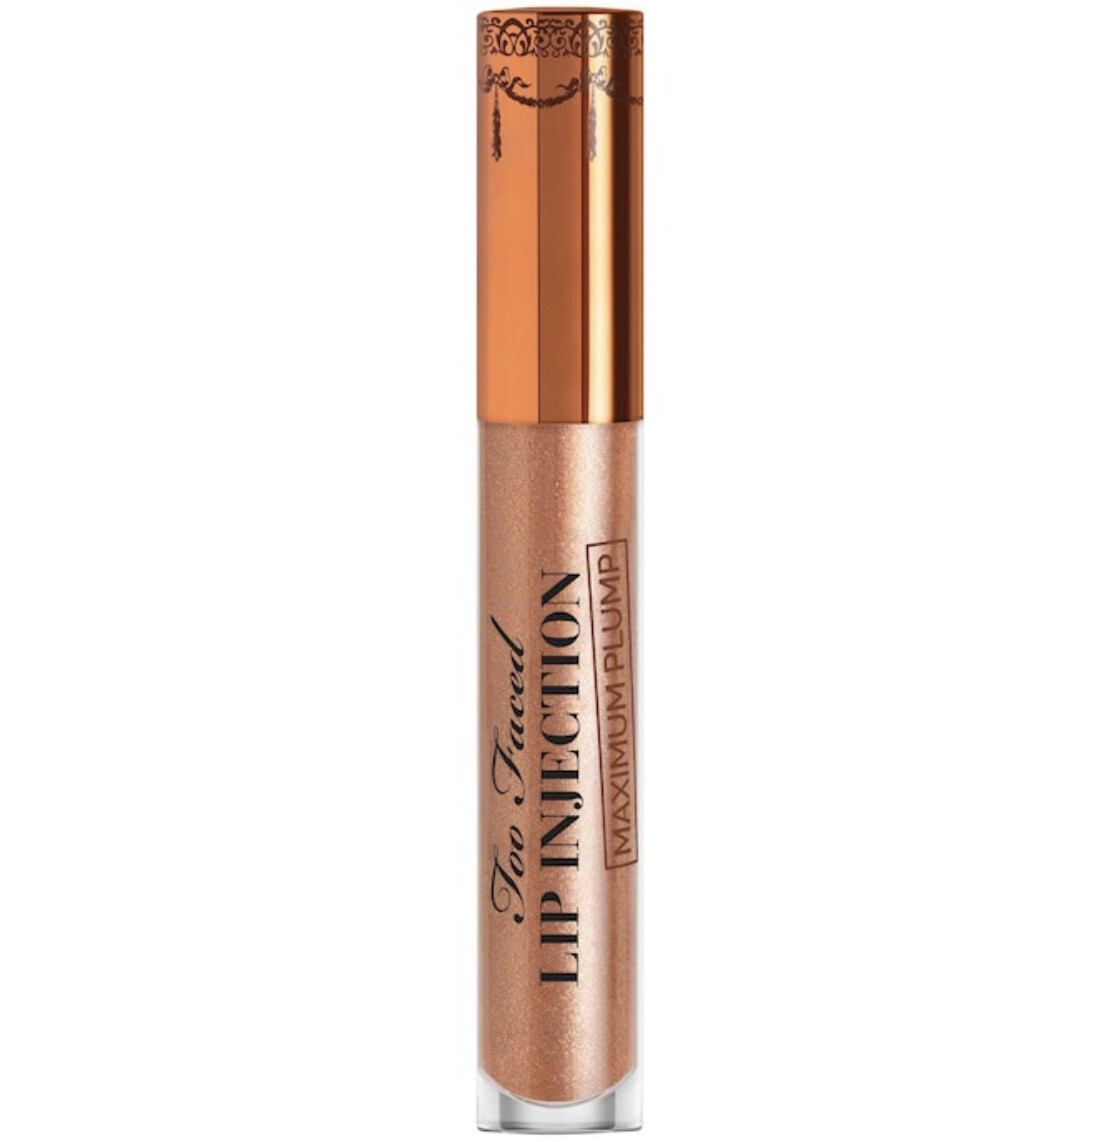 Too Faced - Lip Injection Maximum Plump Extra Strength Lip Plumper | Chocolate Plump - Chocolate-y nude